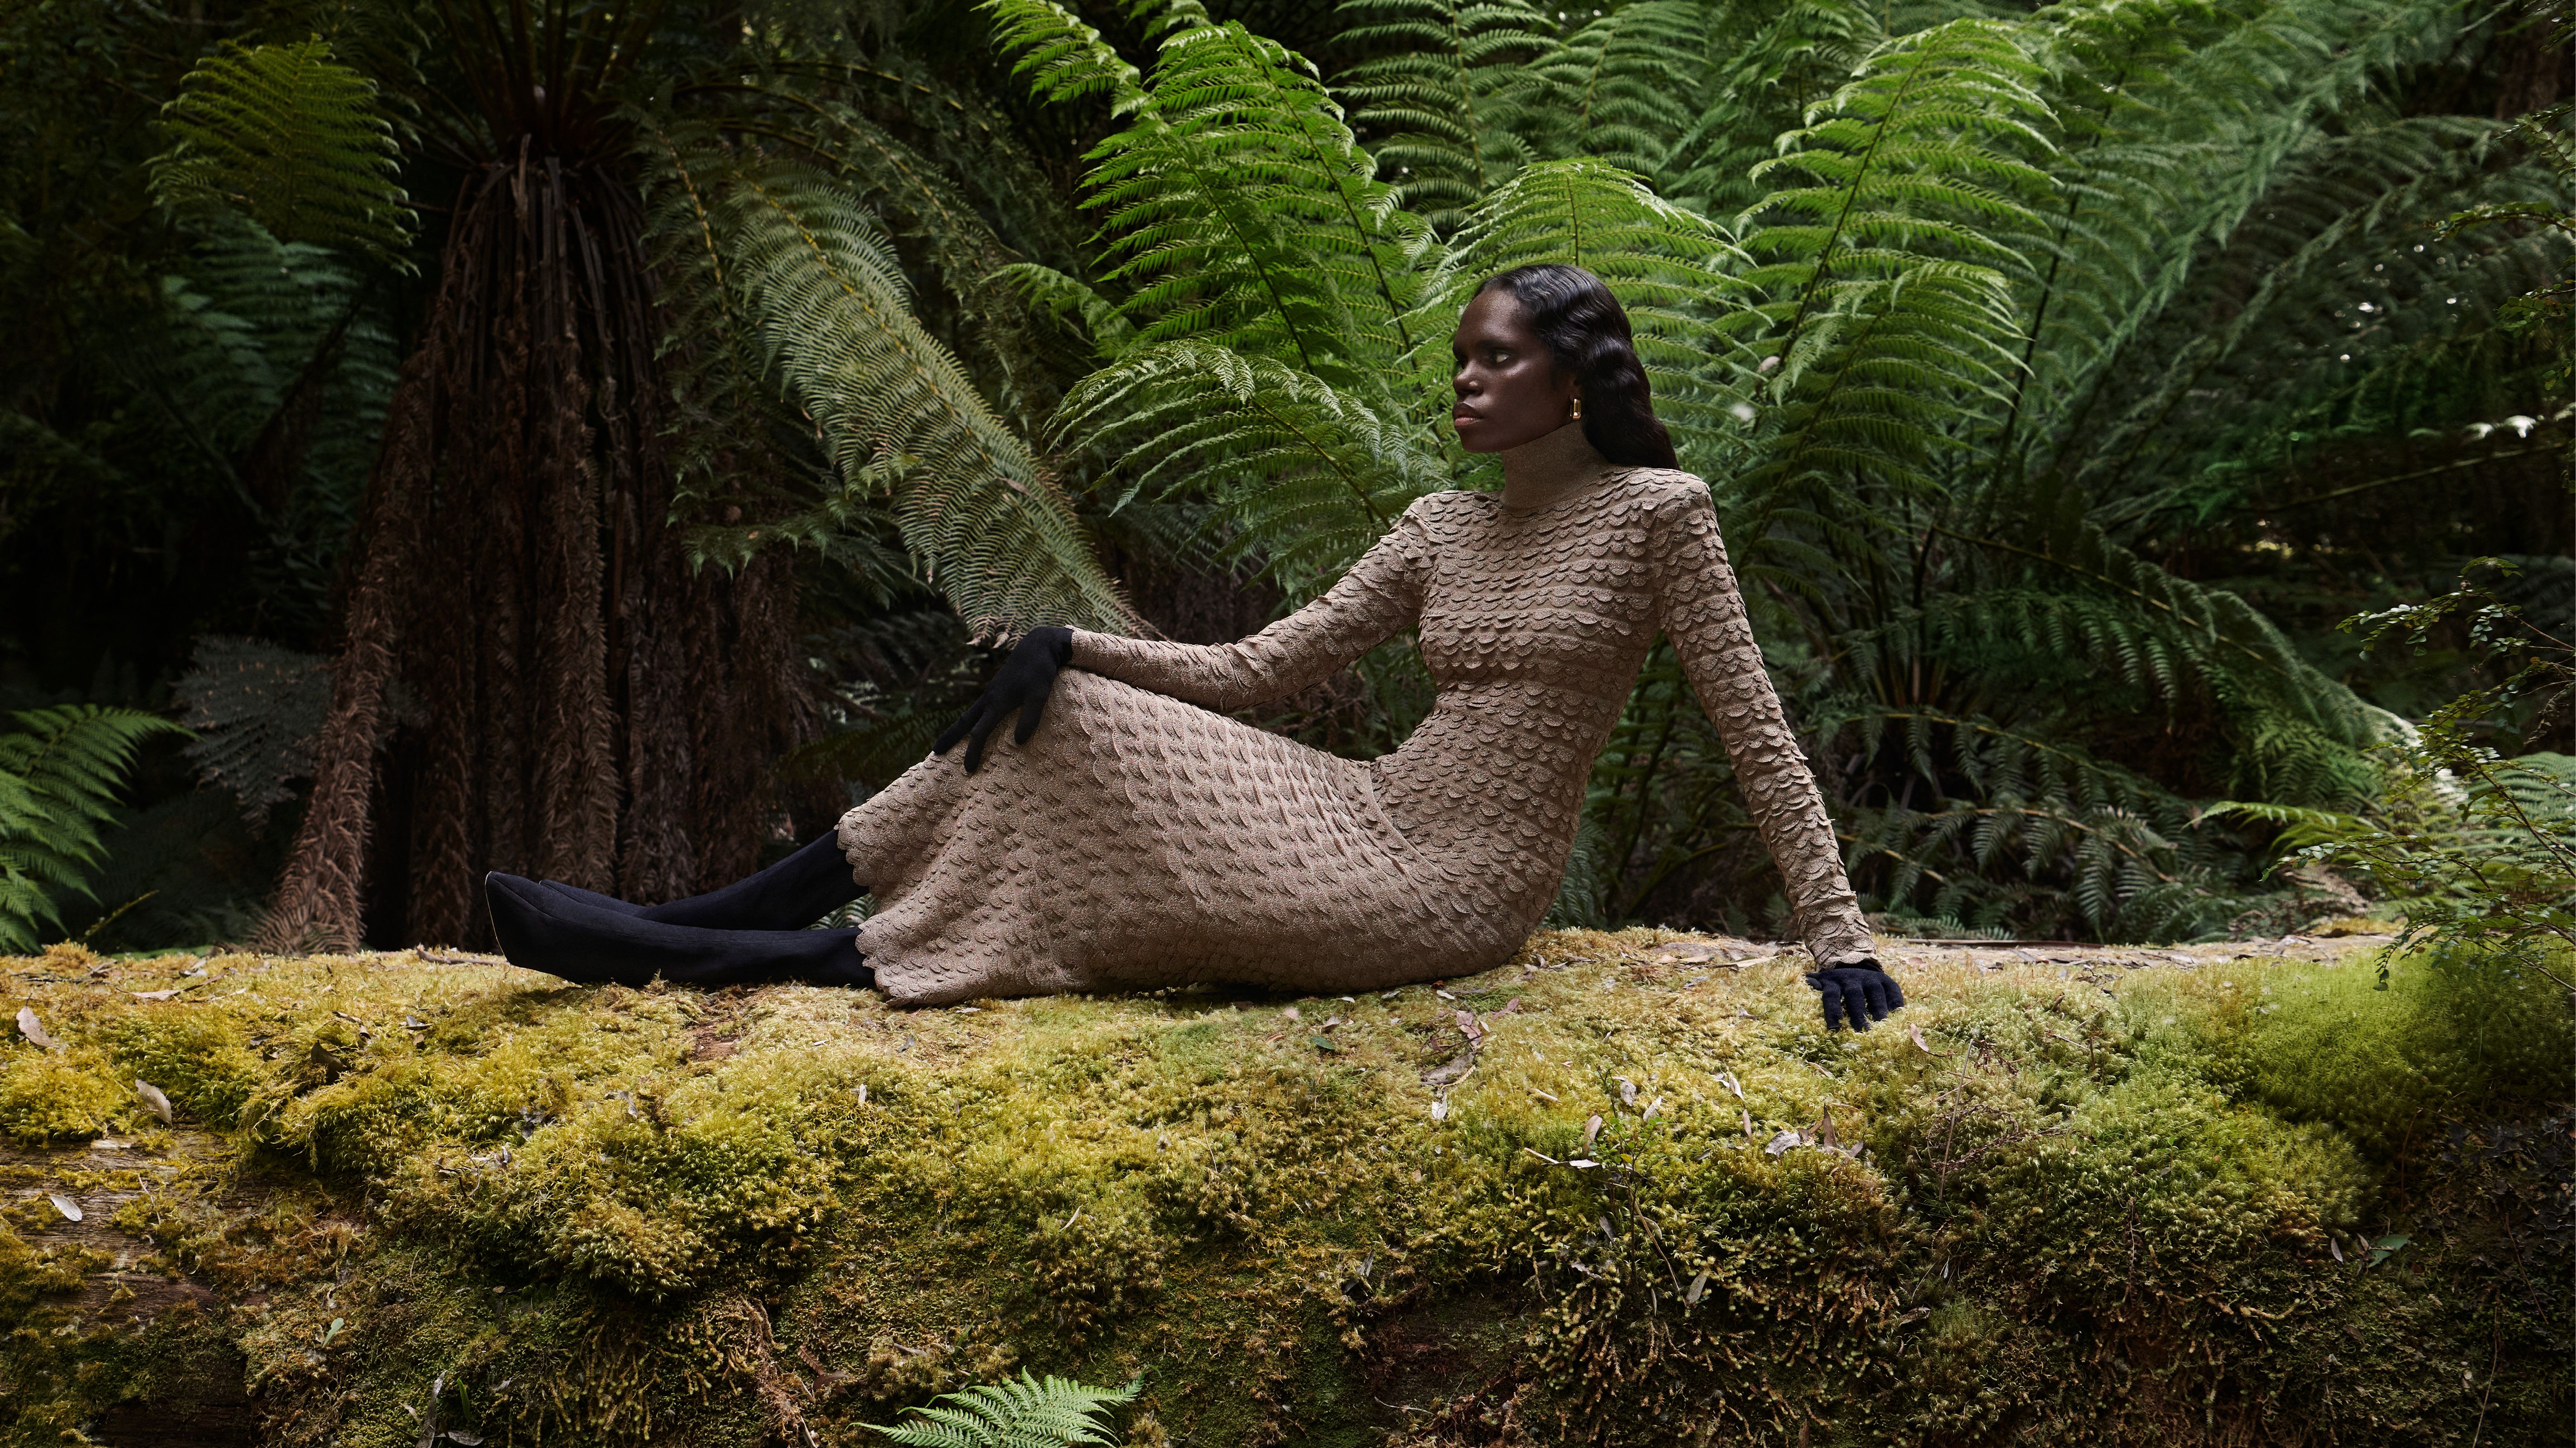 Tarlisa Gaykamangu reclined on moss in the forest wearing a brown knitted gown.